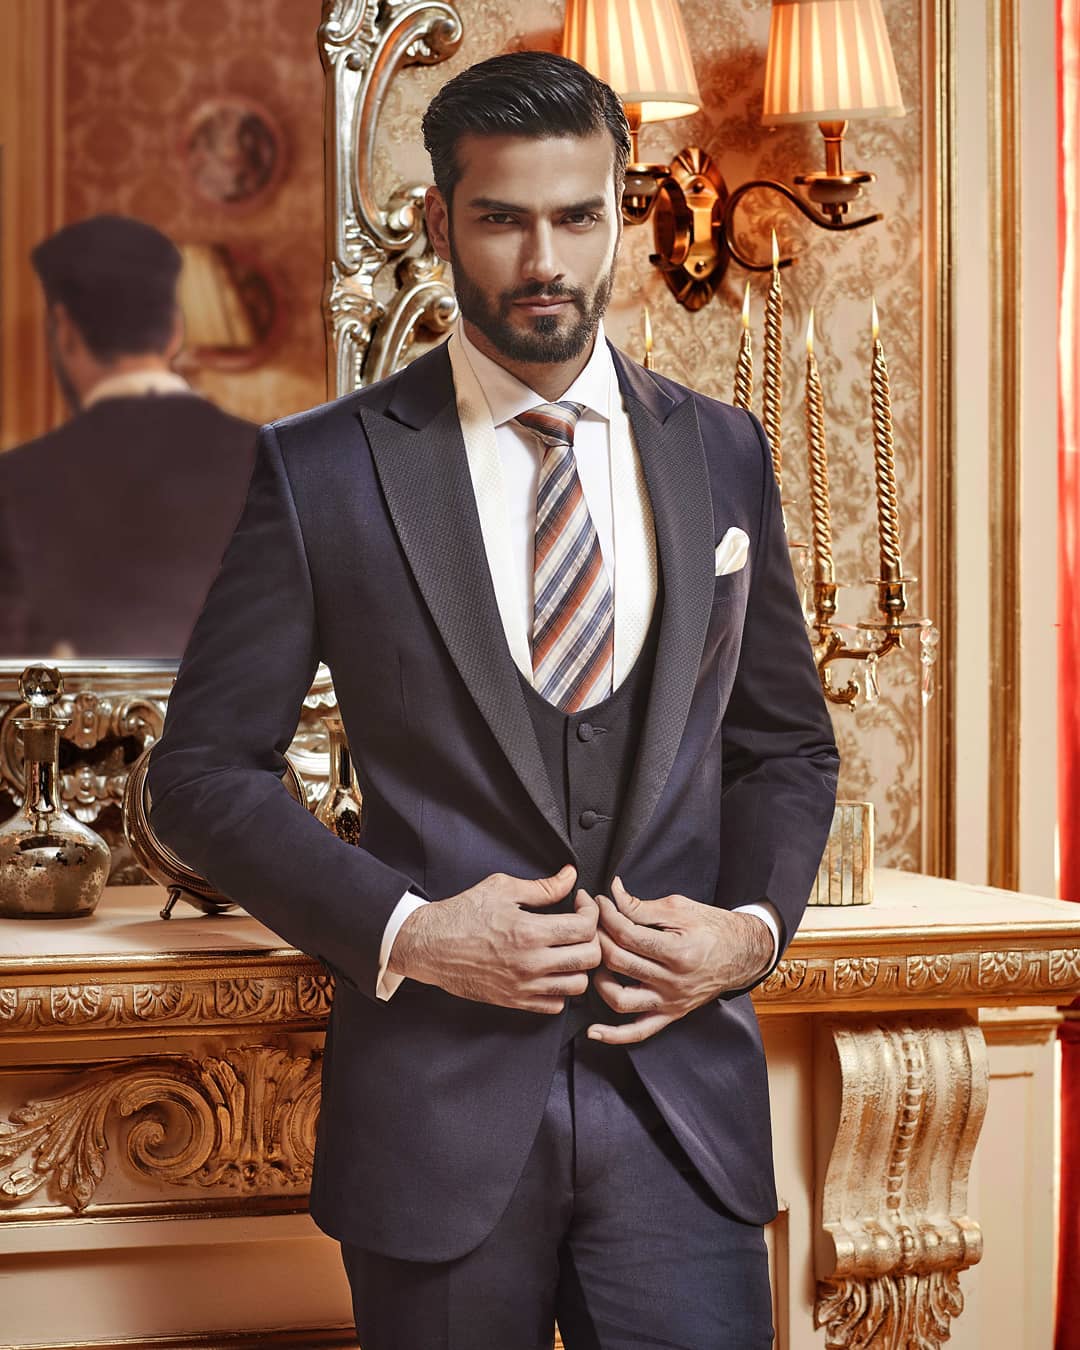 The Arvind Store,  suitedup, fashioningpossibilities, madetofit, madetowear, tailormade, fashionclothes, menswear, mensfashion, mensstyle, mensoutfit, fashionformen, suitup, suited, suitstyle, tailoredsuit, finefabric, thearvindstore